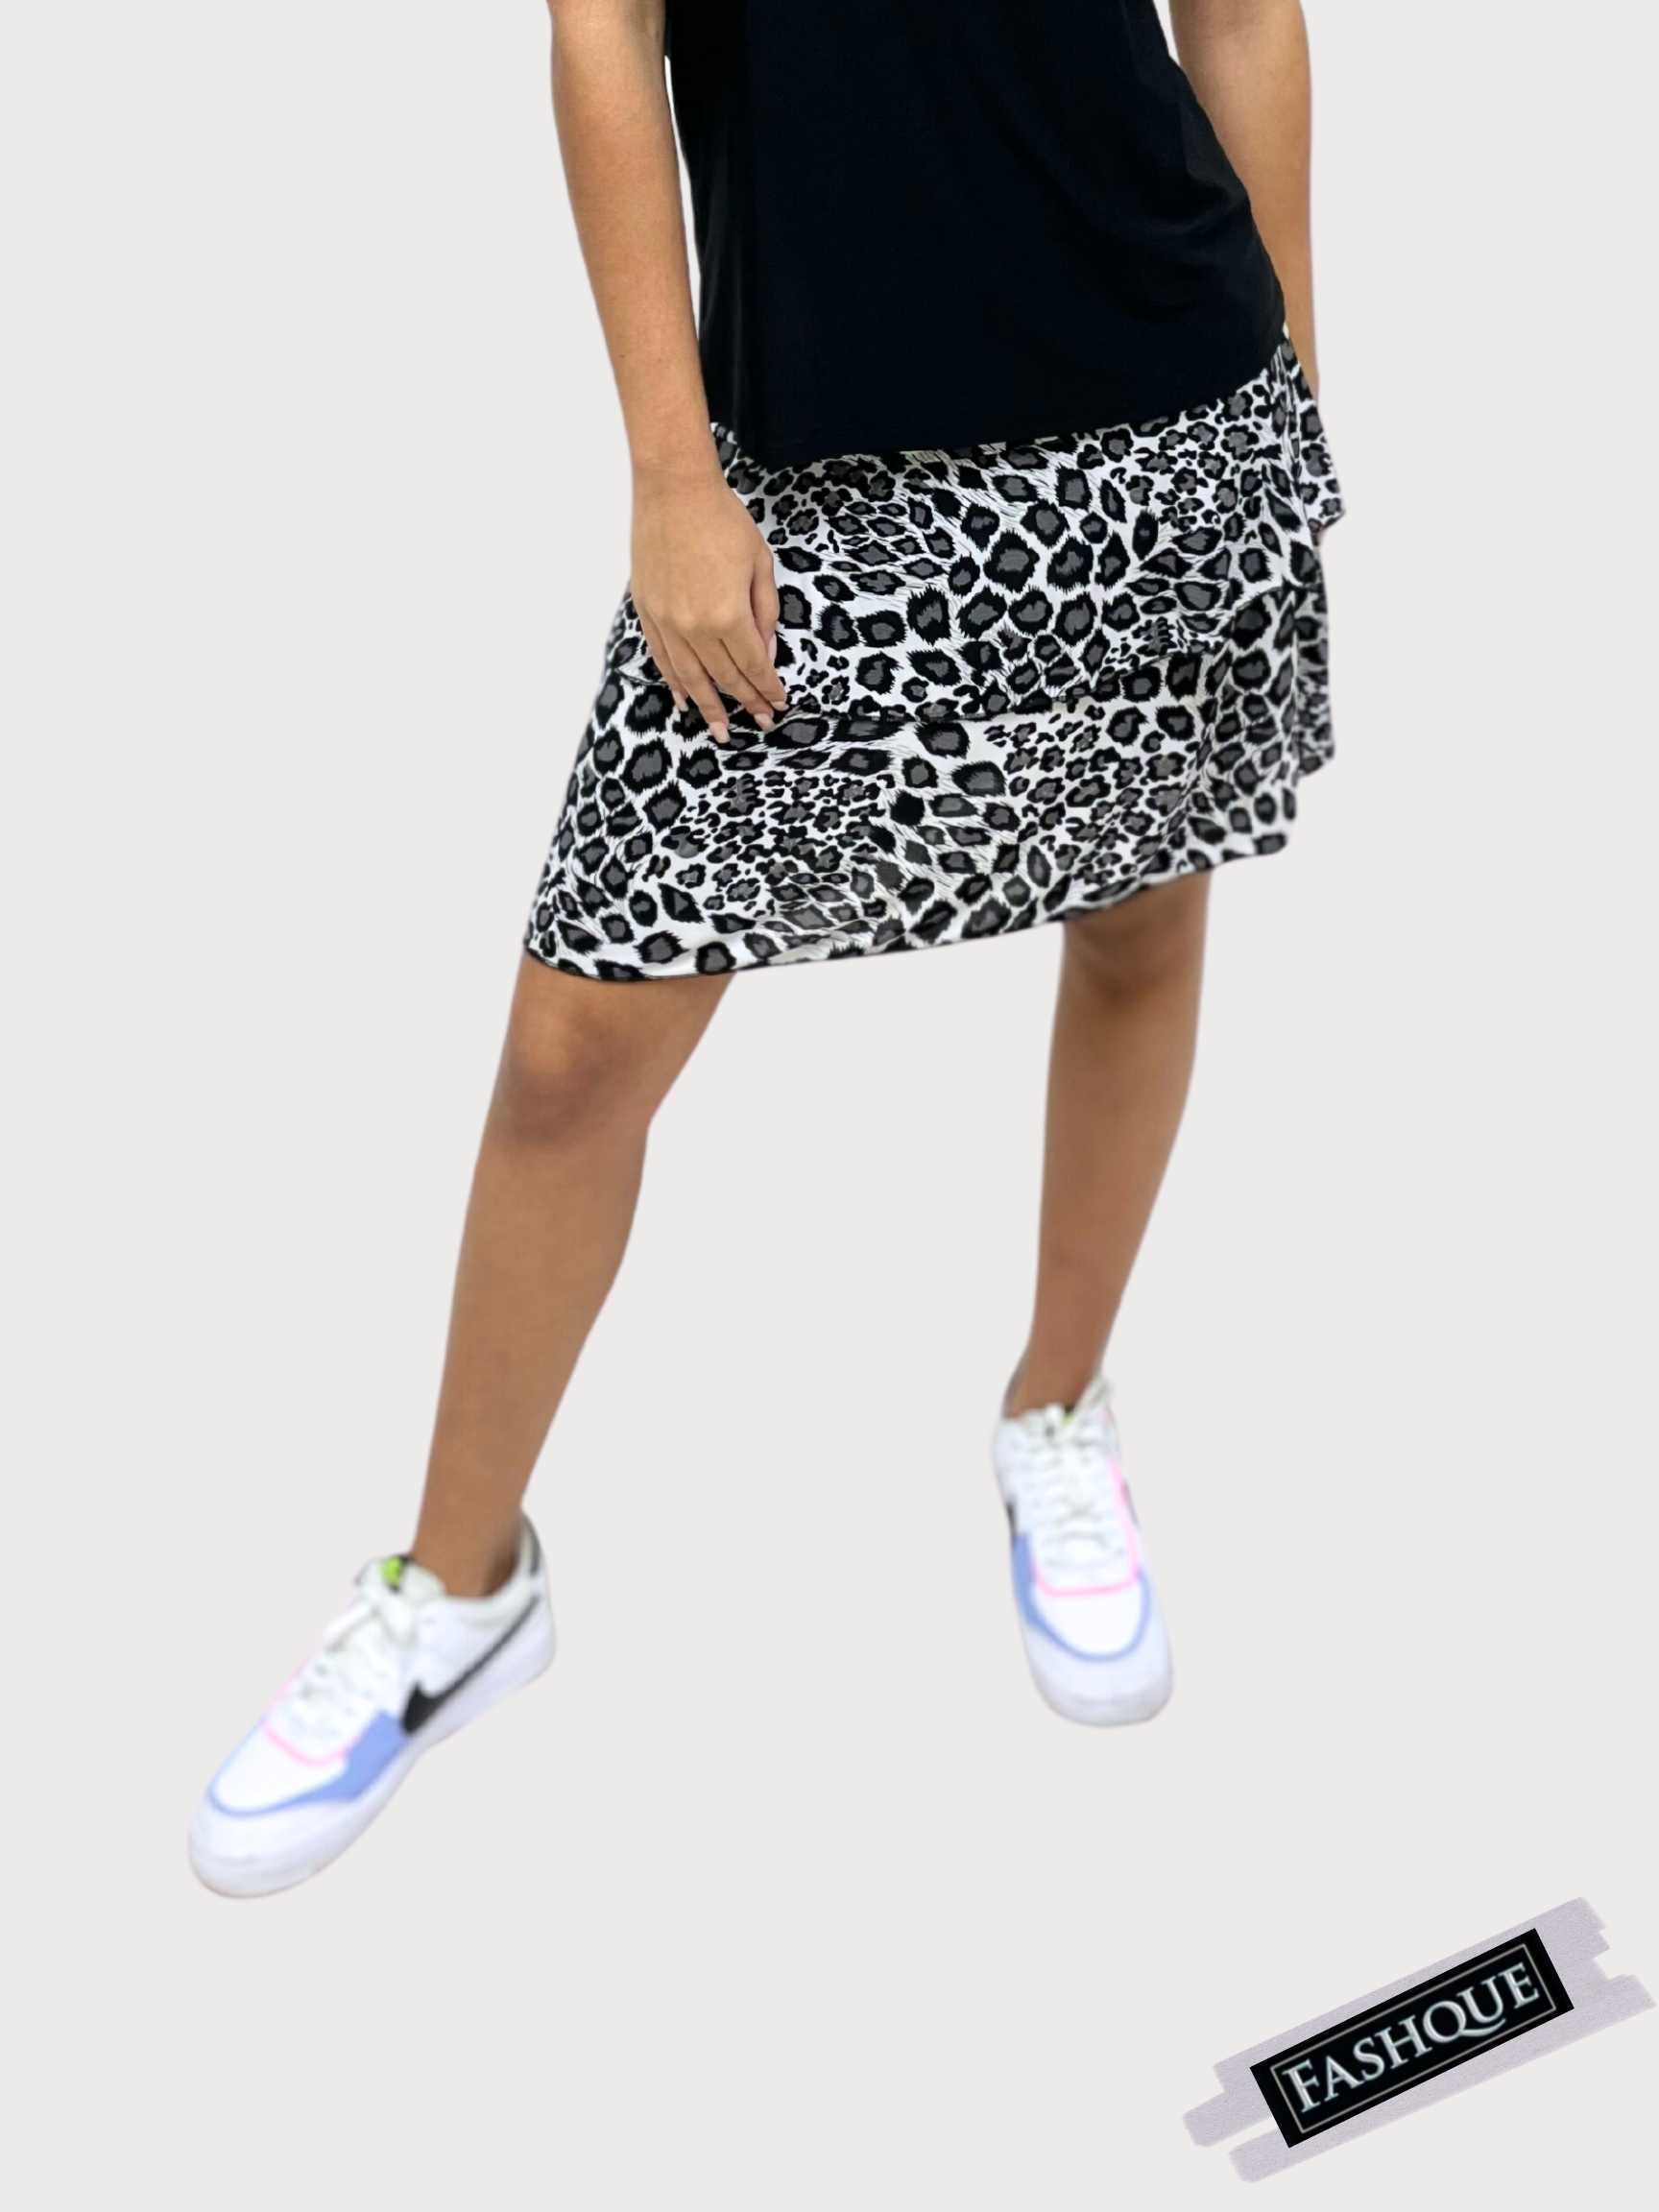 FASHQUE - 3 Tier PRINTED SKORT with the Ruffle in the center - SH001 SALE